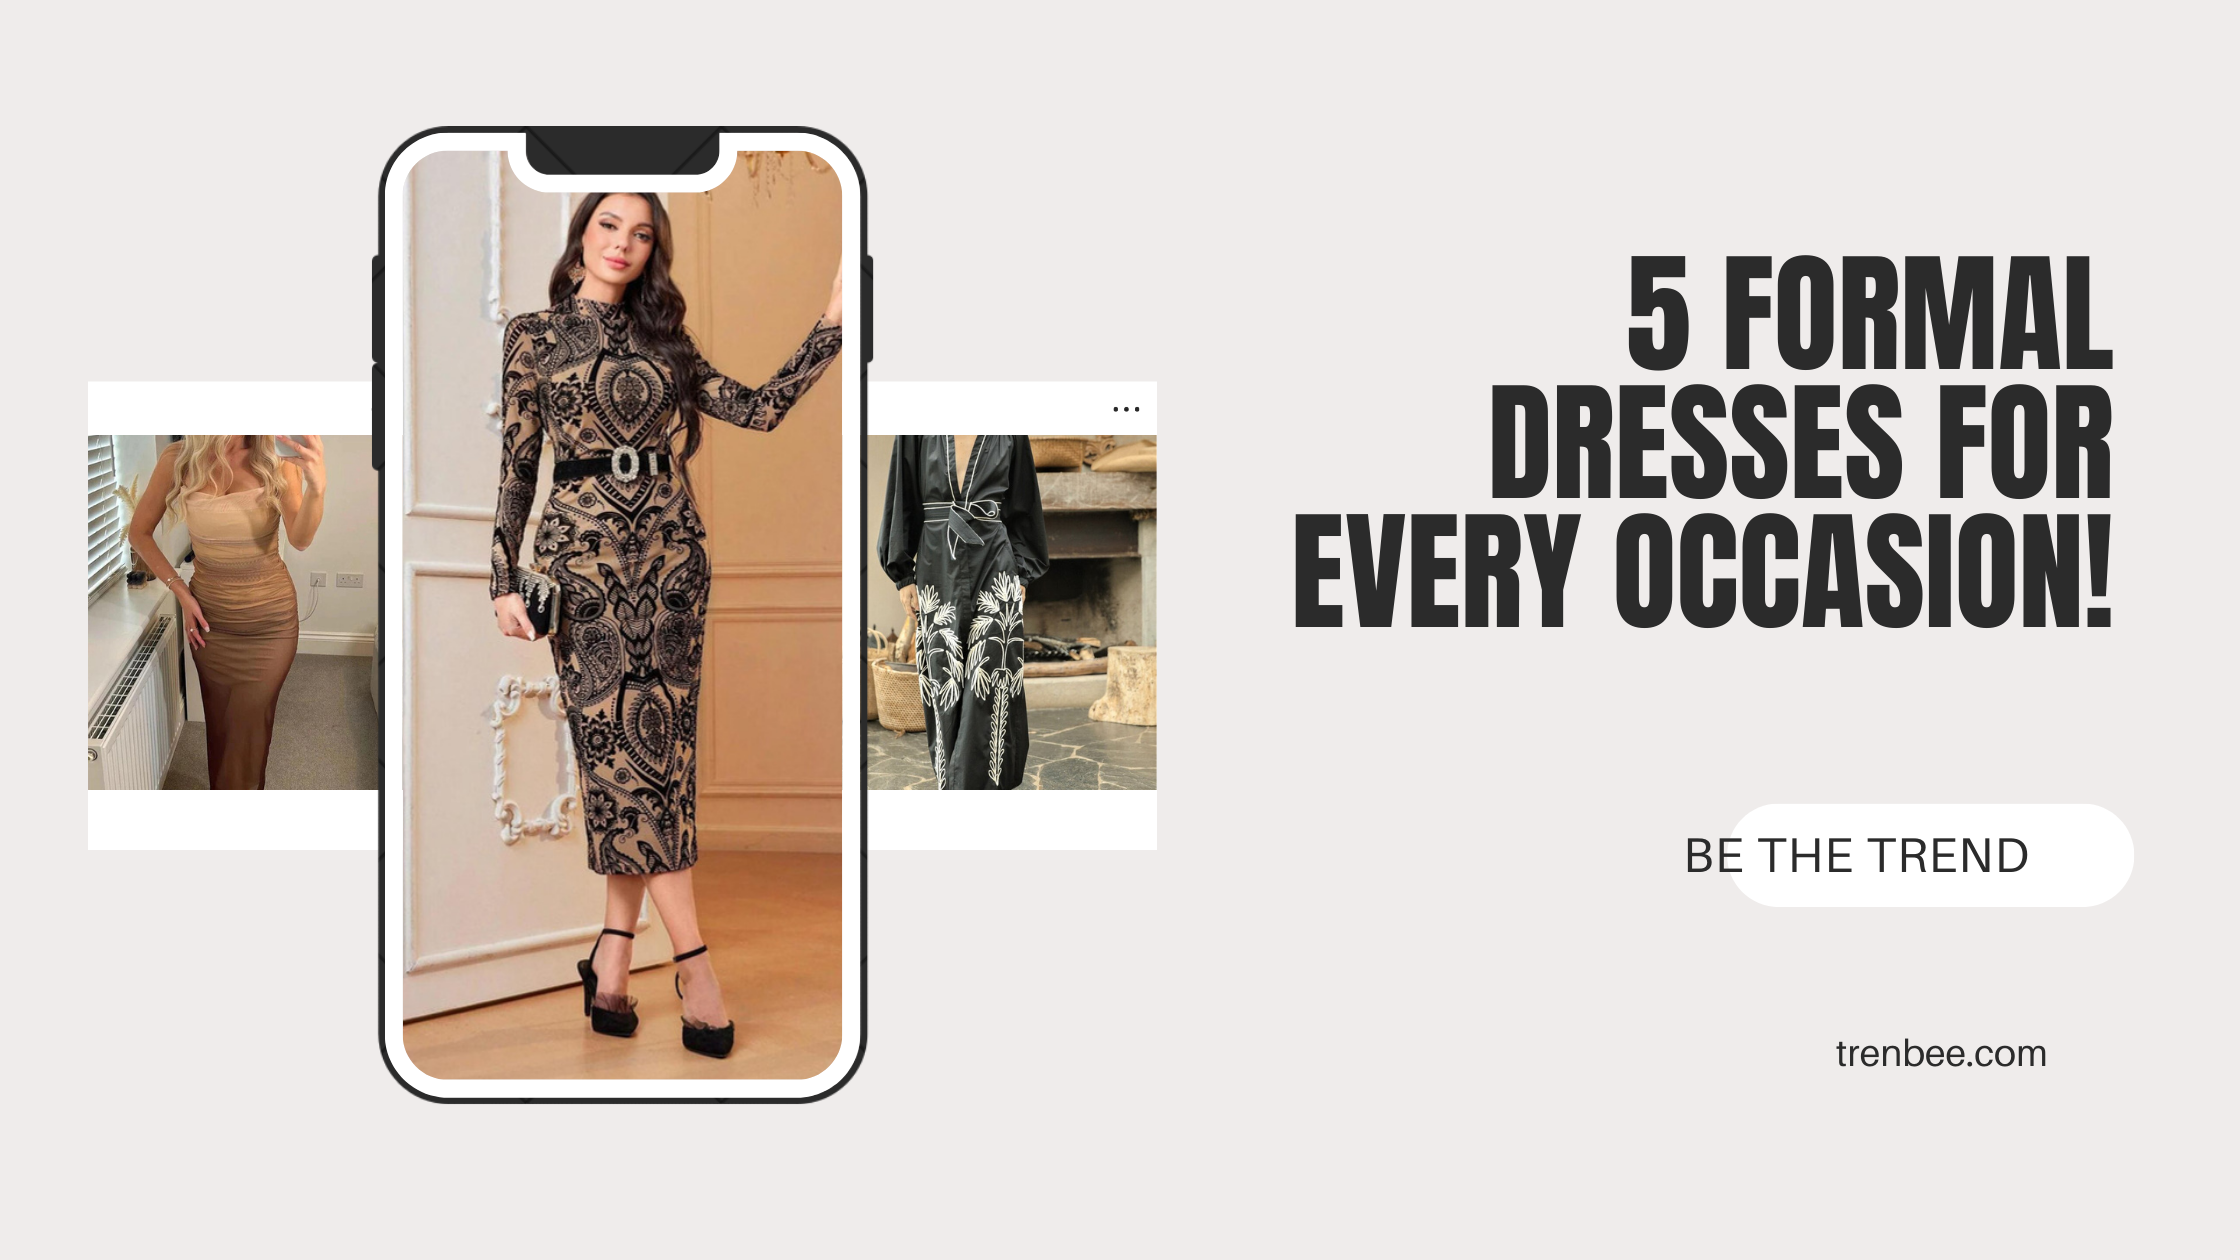 5 Formal Dresses for Every Occasion!